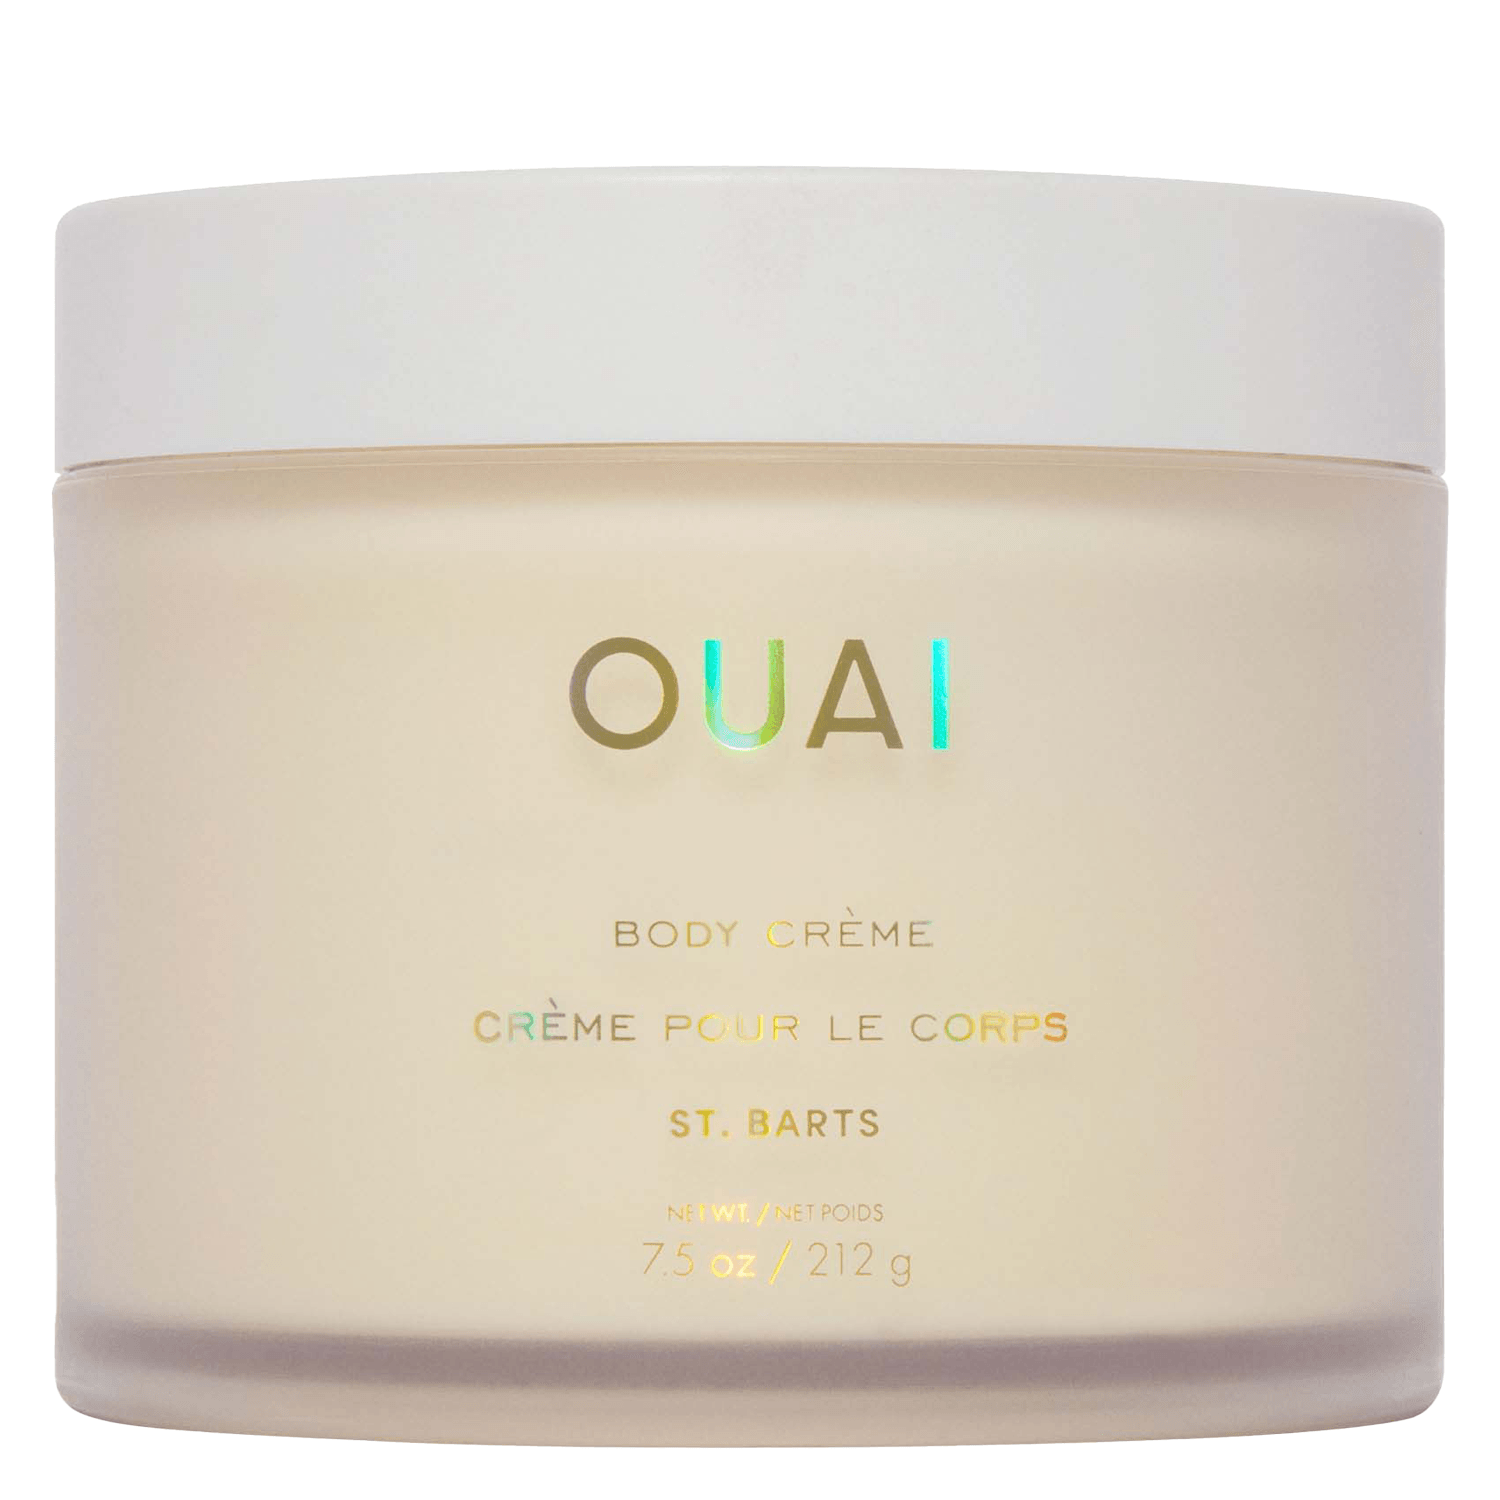 Product image from OUAI - Body Crème St. Barts